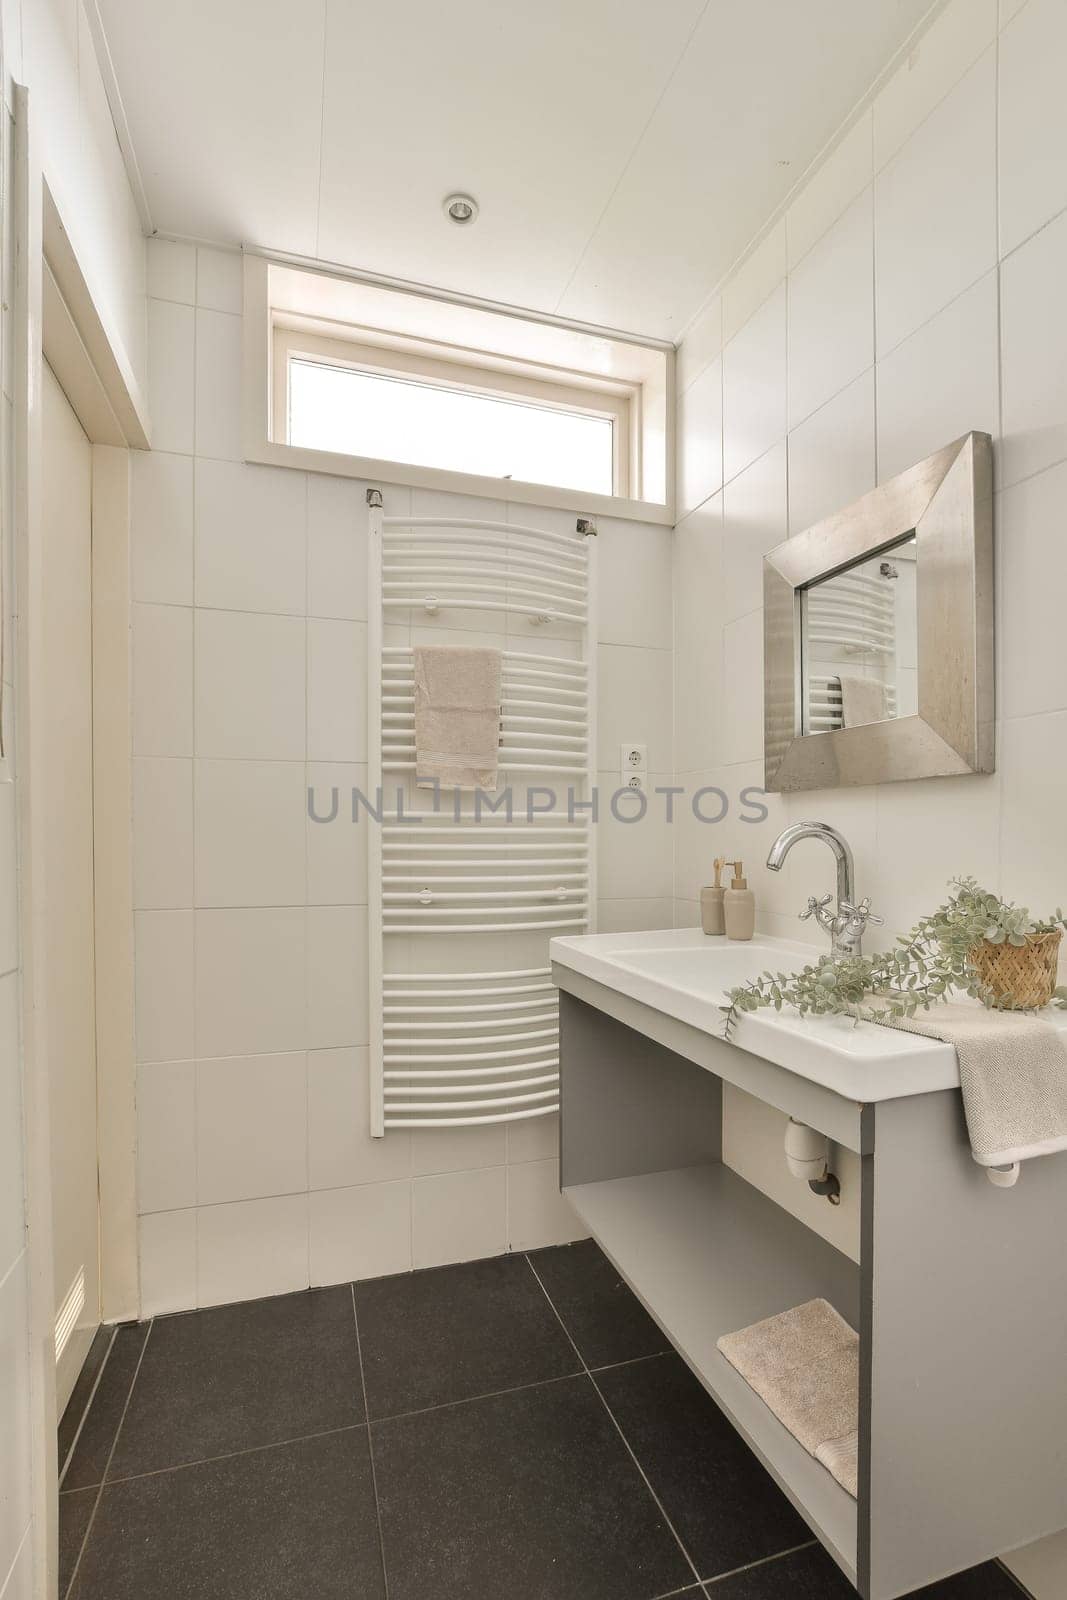 a modern bathroom with black tile flooring and white tiles on the walls, there is a large mirror above the sink